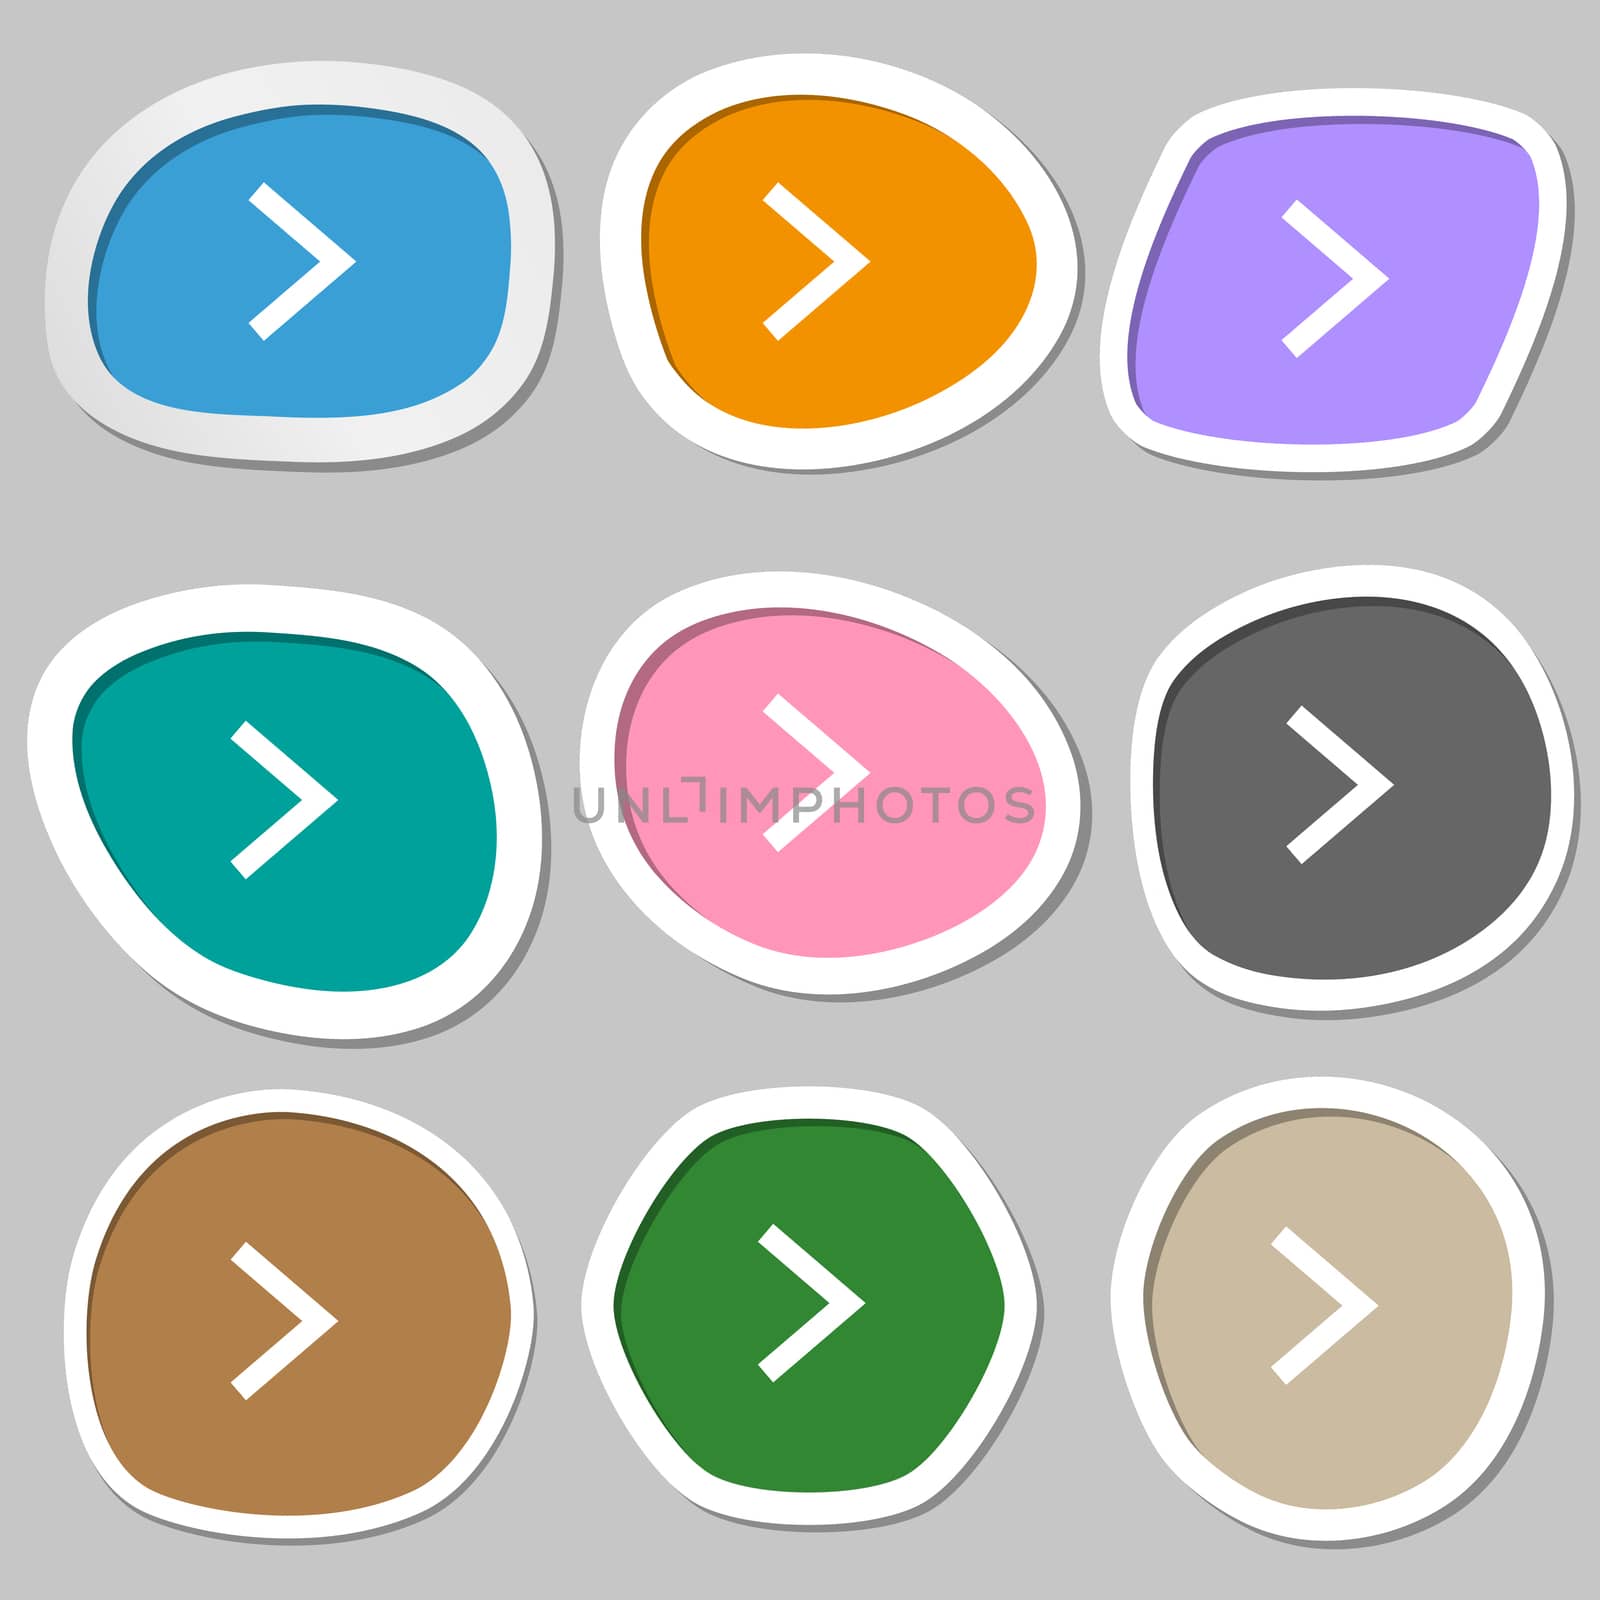 Arrow right, Next icon symbols. Multicolored paper stickers.  by serhii_lohvyniuk